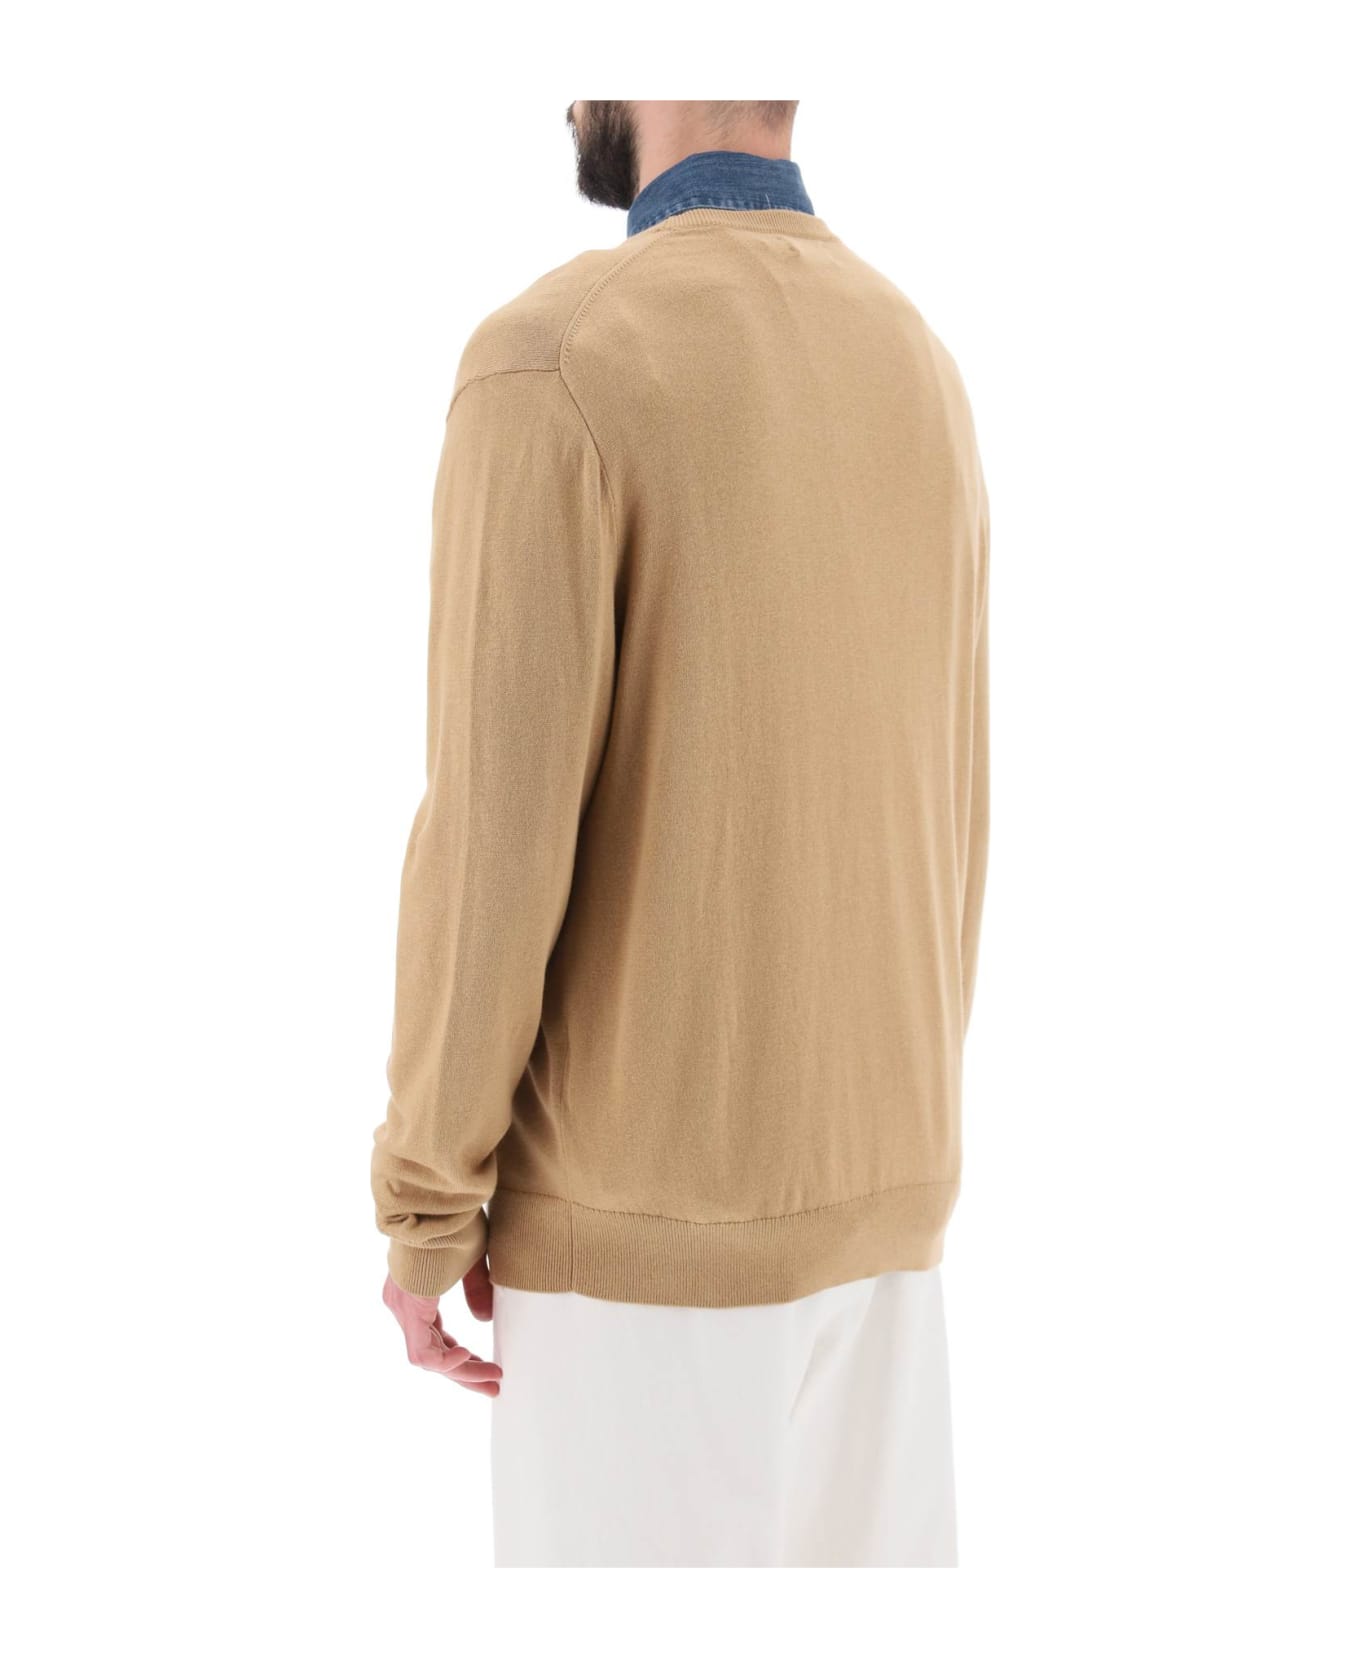 Polo Ralph Lauren Sweater In Cotton And Cashmere - BURLAP TAN (Beige) ニットウェア